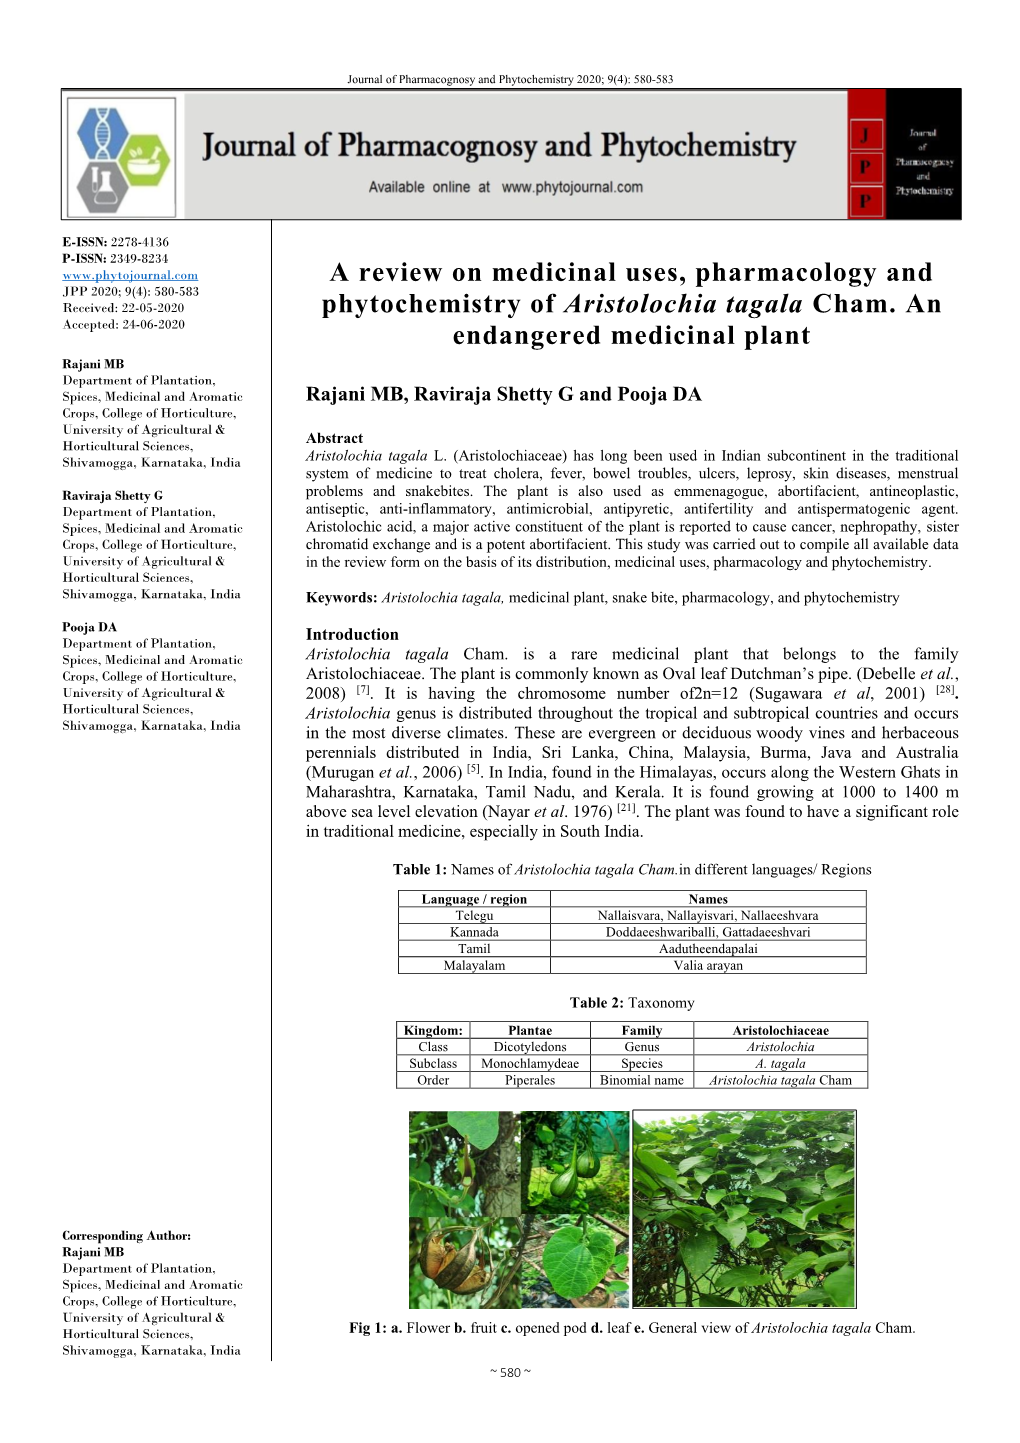 A Review on Medicinal Uses, Pharmacology and Phytochemistry